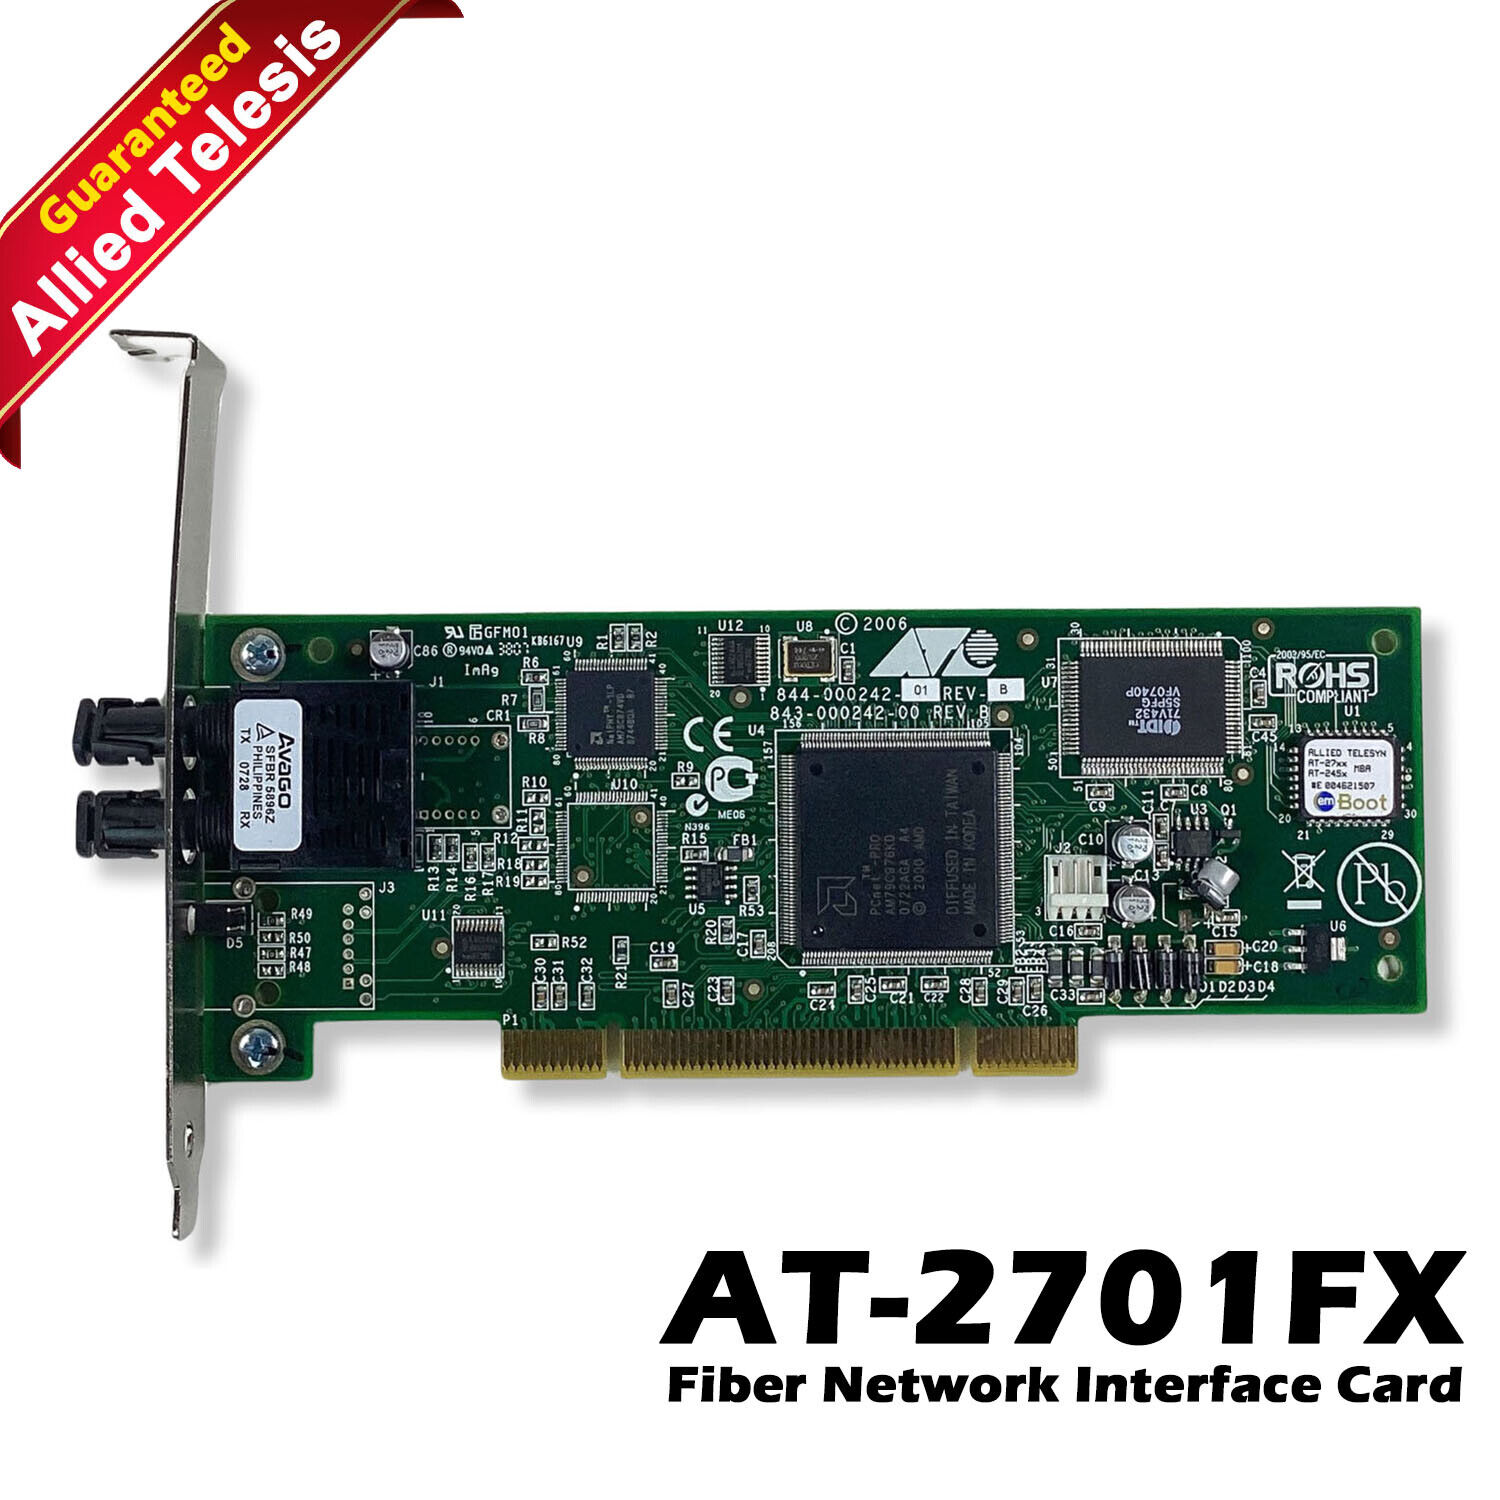 Allied Telesis AT-2701FX/ST-901 100mbps Dual Port Fiber Network Interface Card